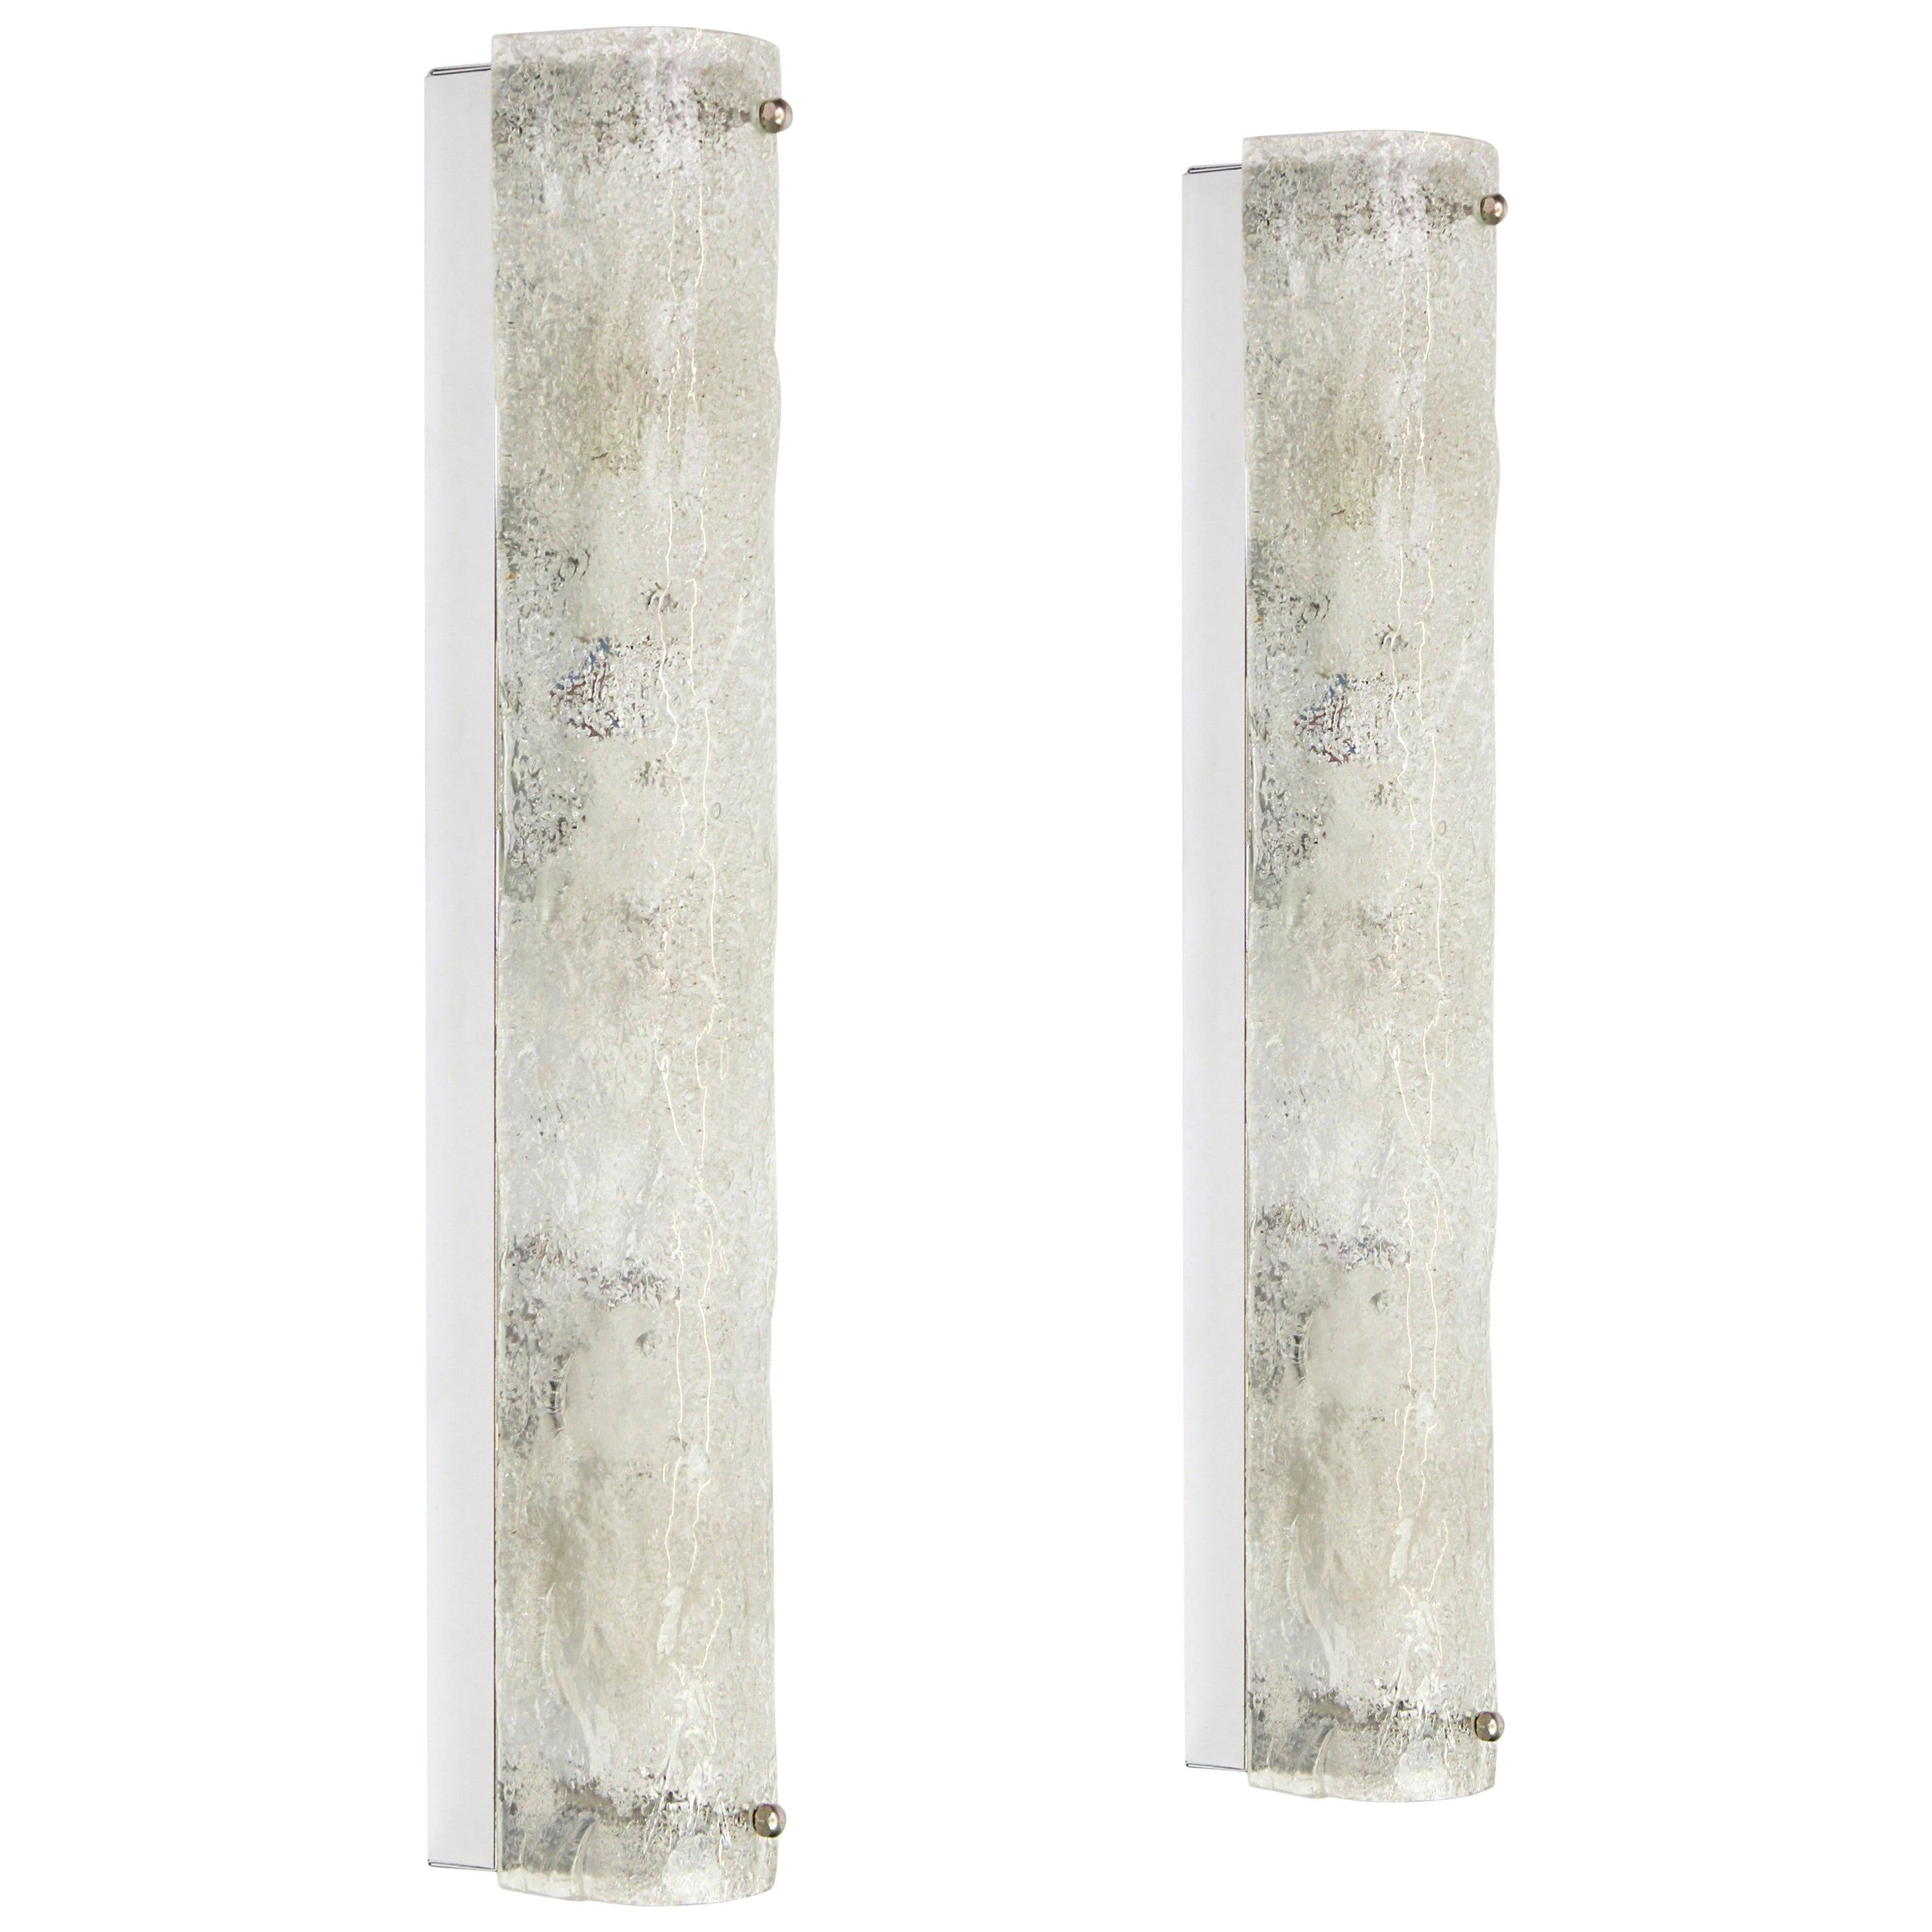 Pair of Large Murano Ice Glass Sconces Modernist Wall Fixtures, Germany, 1960s For Sale